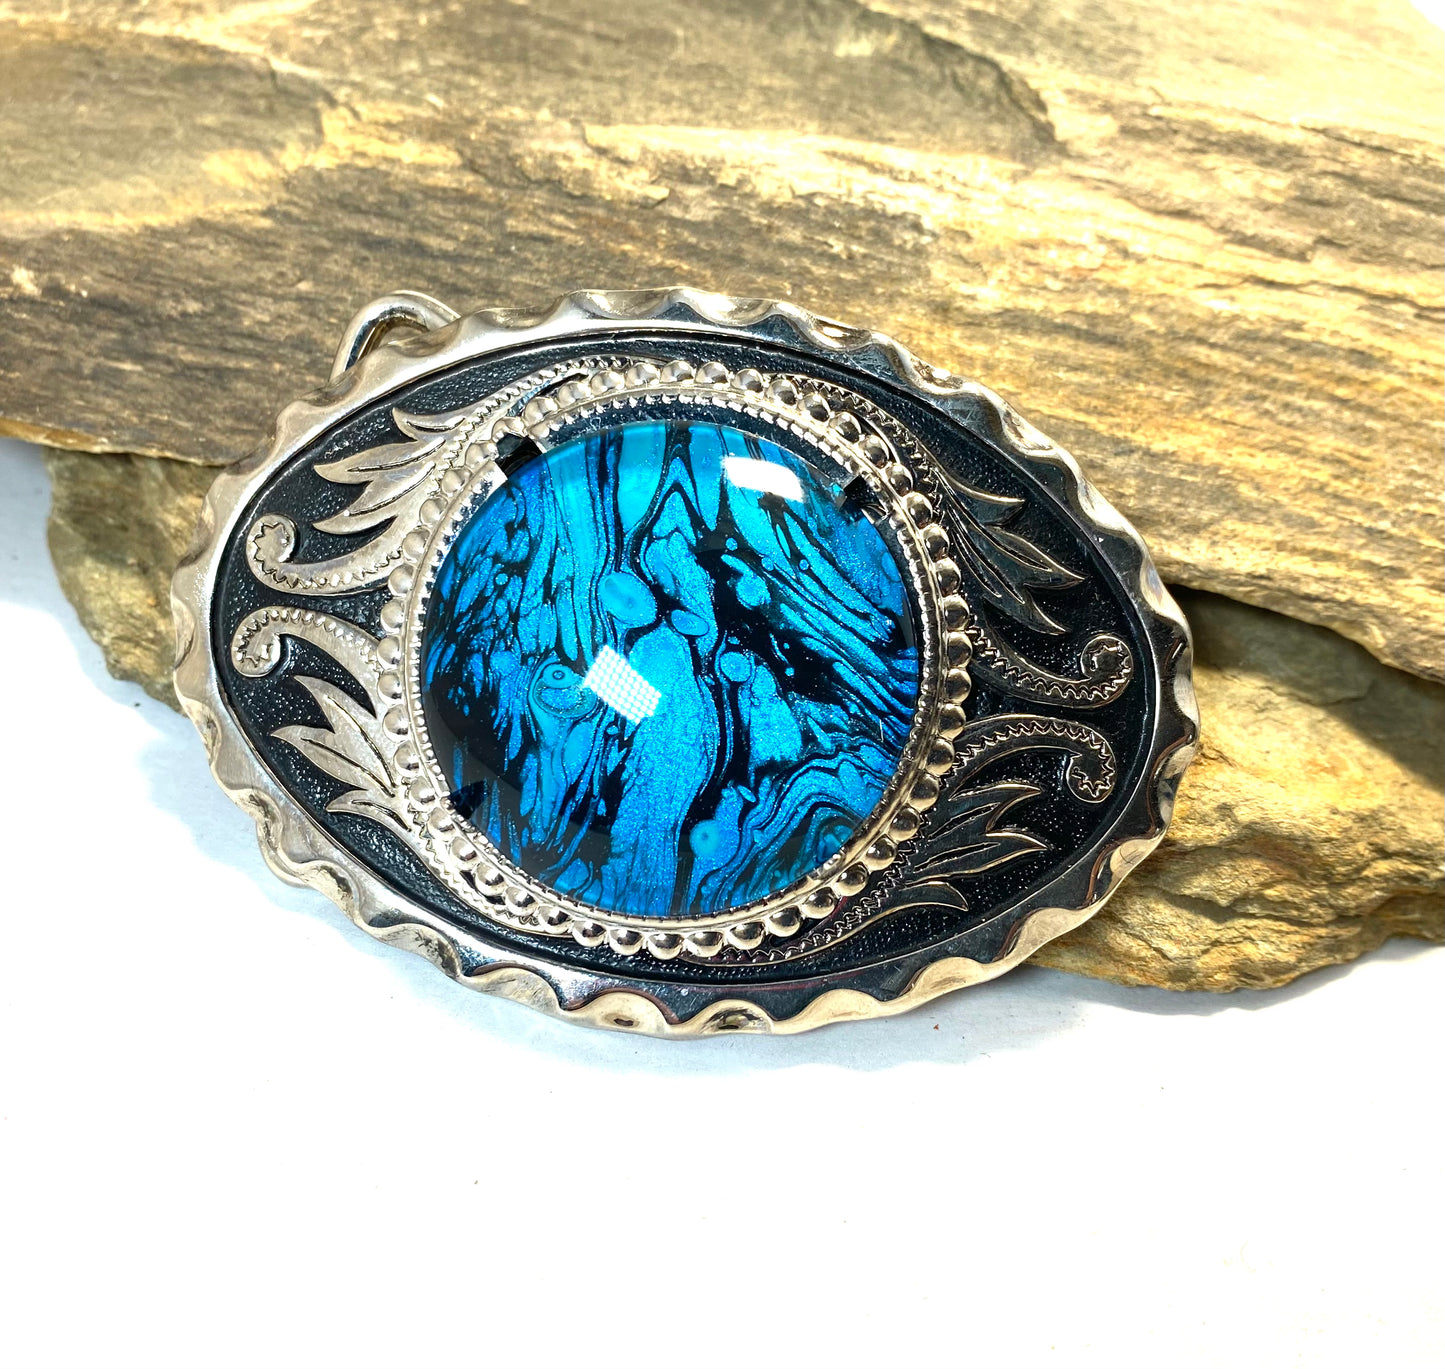 Black and Silver filigree buckle with blue and black stone - set available